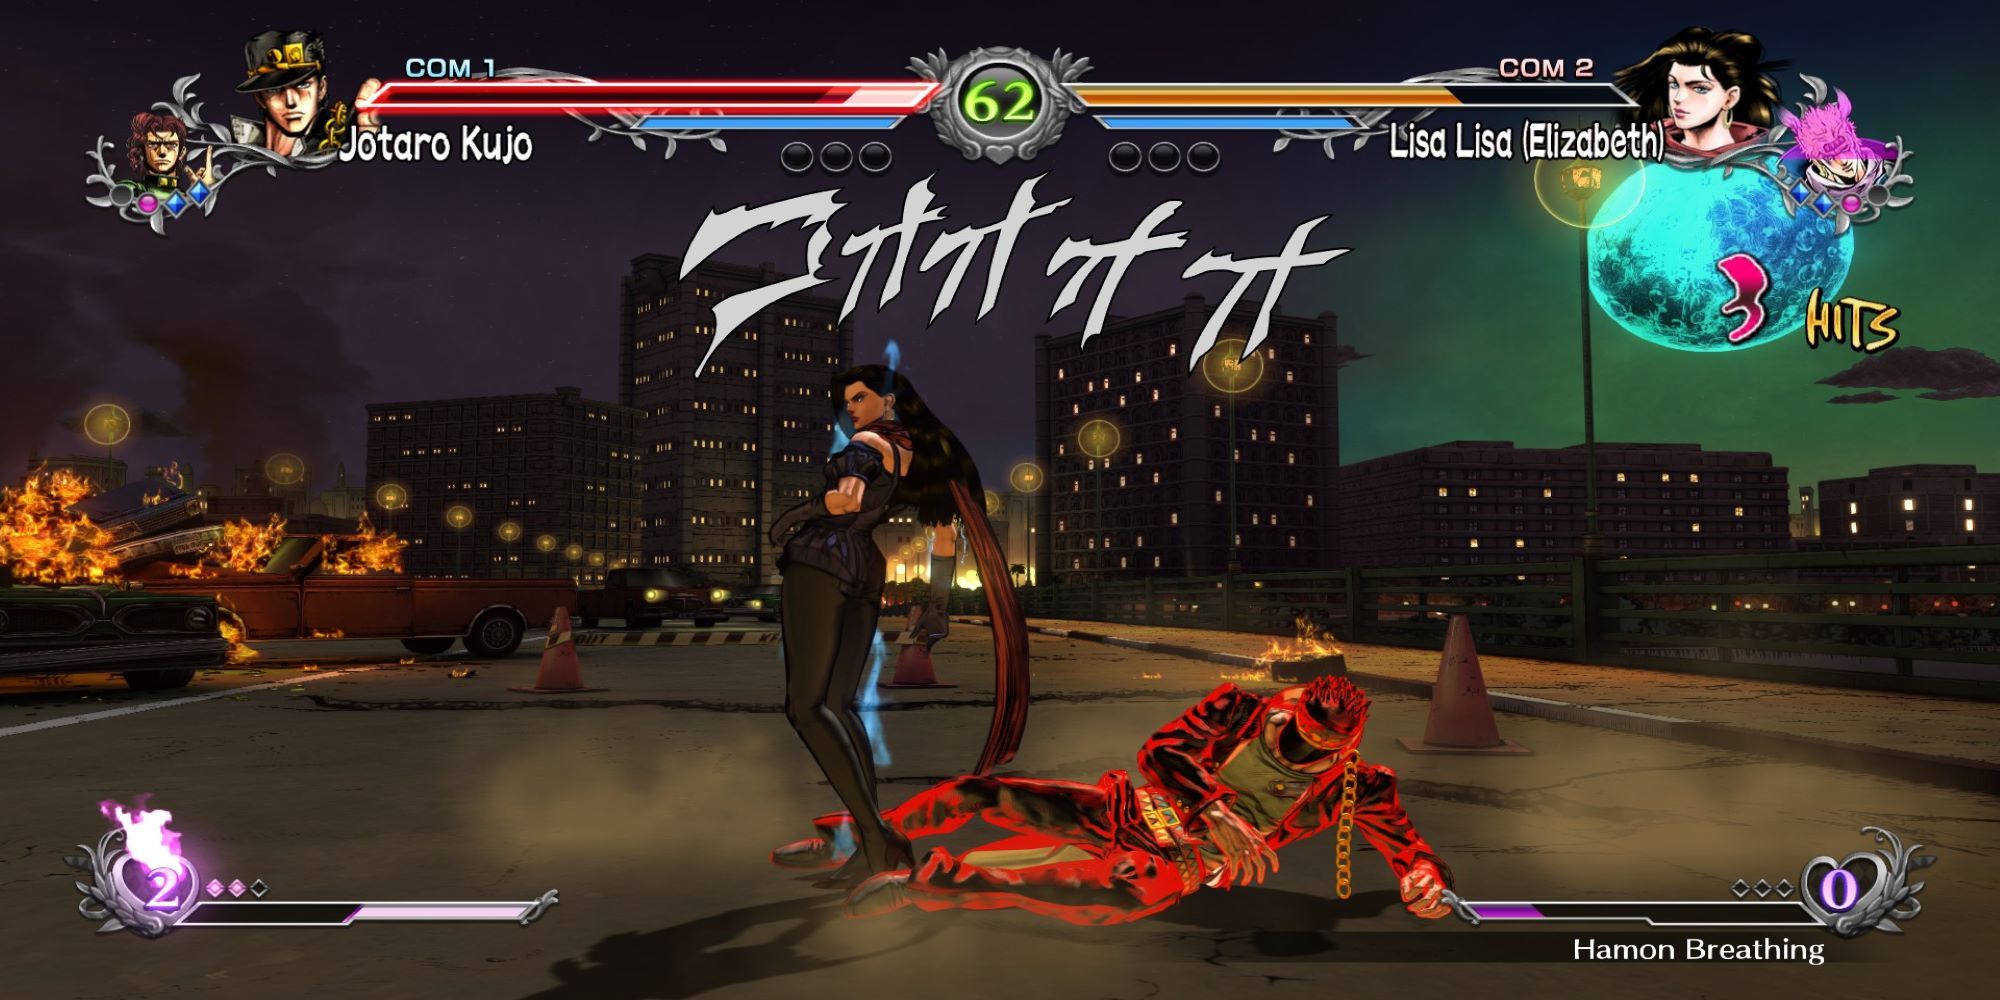 Lisa Lisa charges her Heart Heat Gauge with Hamon-breathing during a battle with Jotaro at the Cairo Bridge in Jojo's Bizarre Adventure: ASBR.